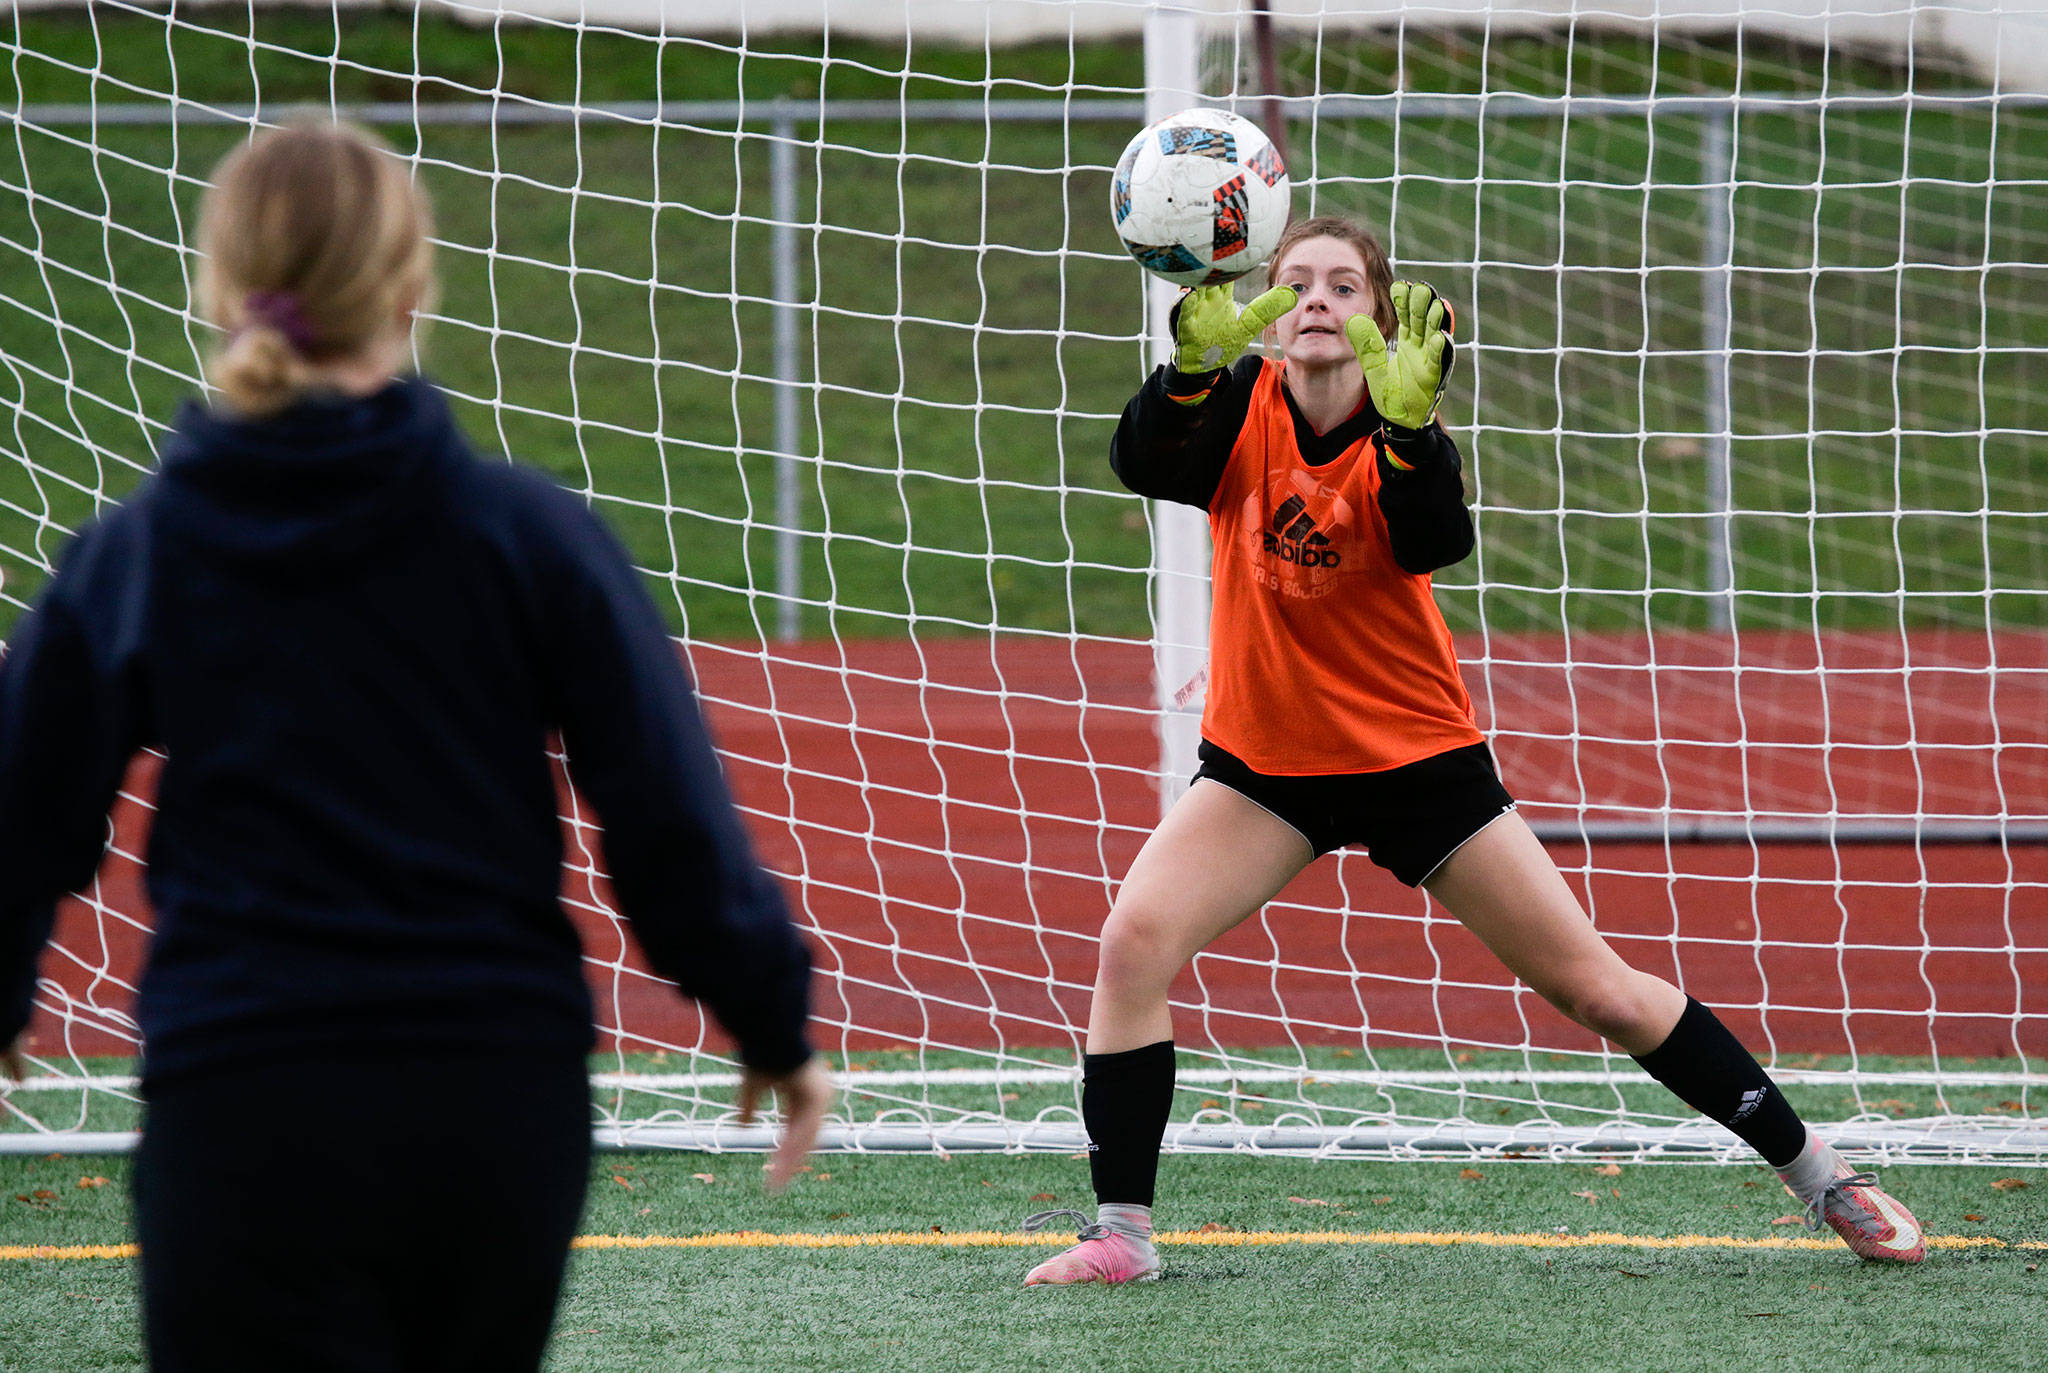 Goalie Cheyenne Rodgers keeps her eyes on the ball as she blocks a kick during shootout drills with the Snohomish High soccer team on Friday, Nov. 2, 2018 in Snohomish. (Andy Bronson / The Herald)